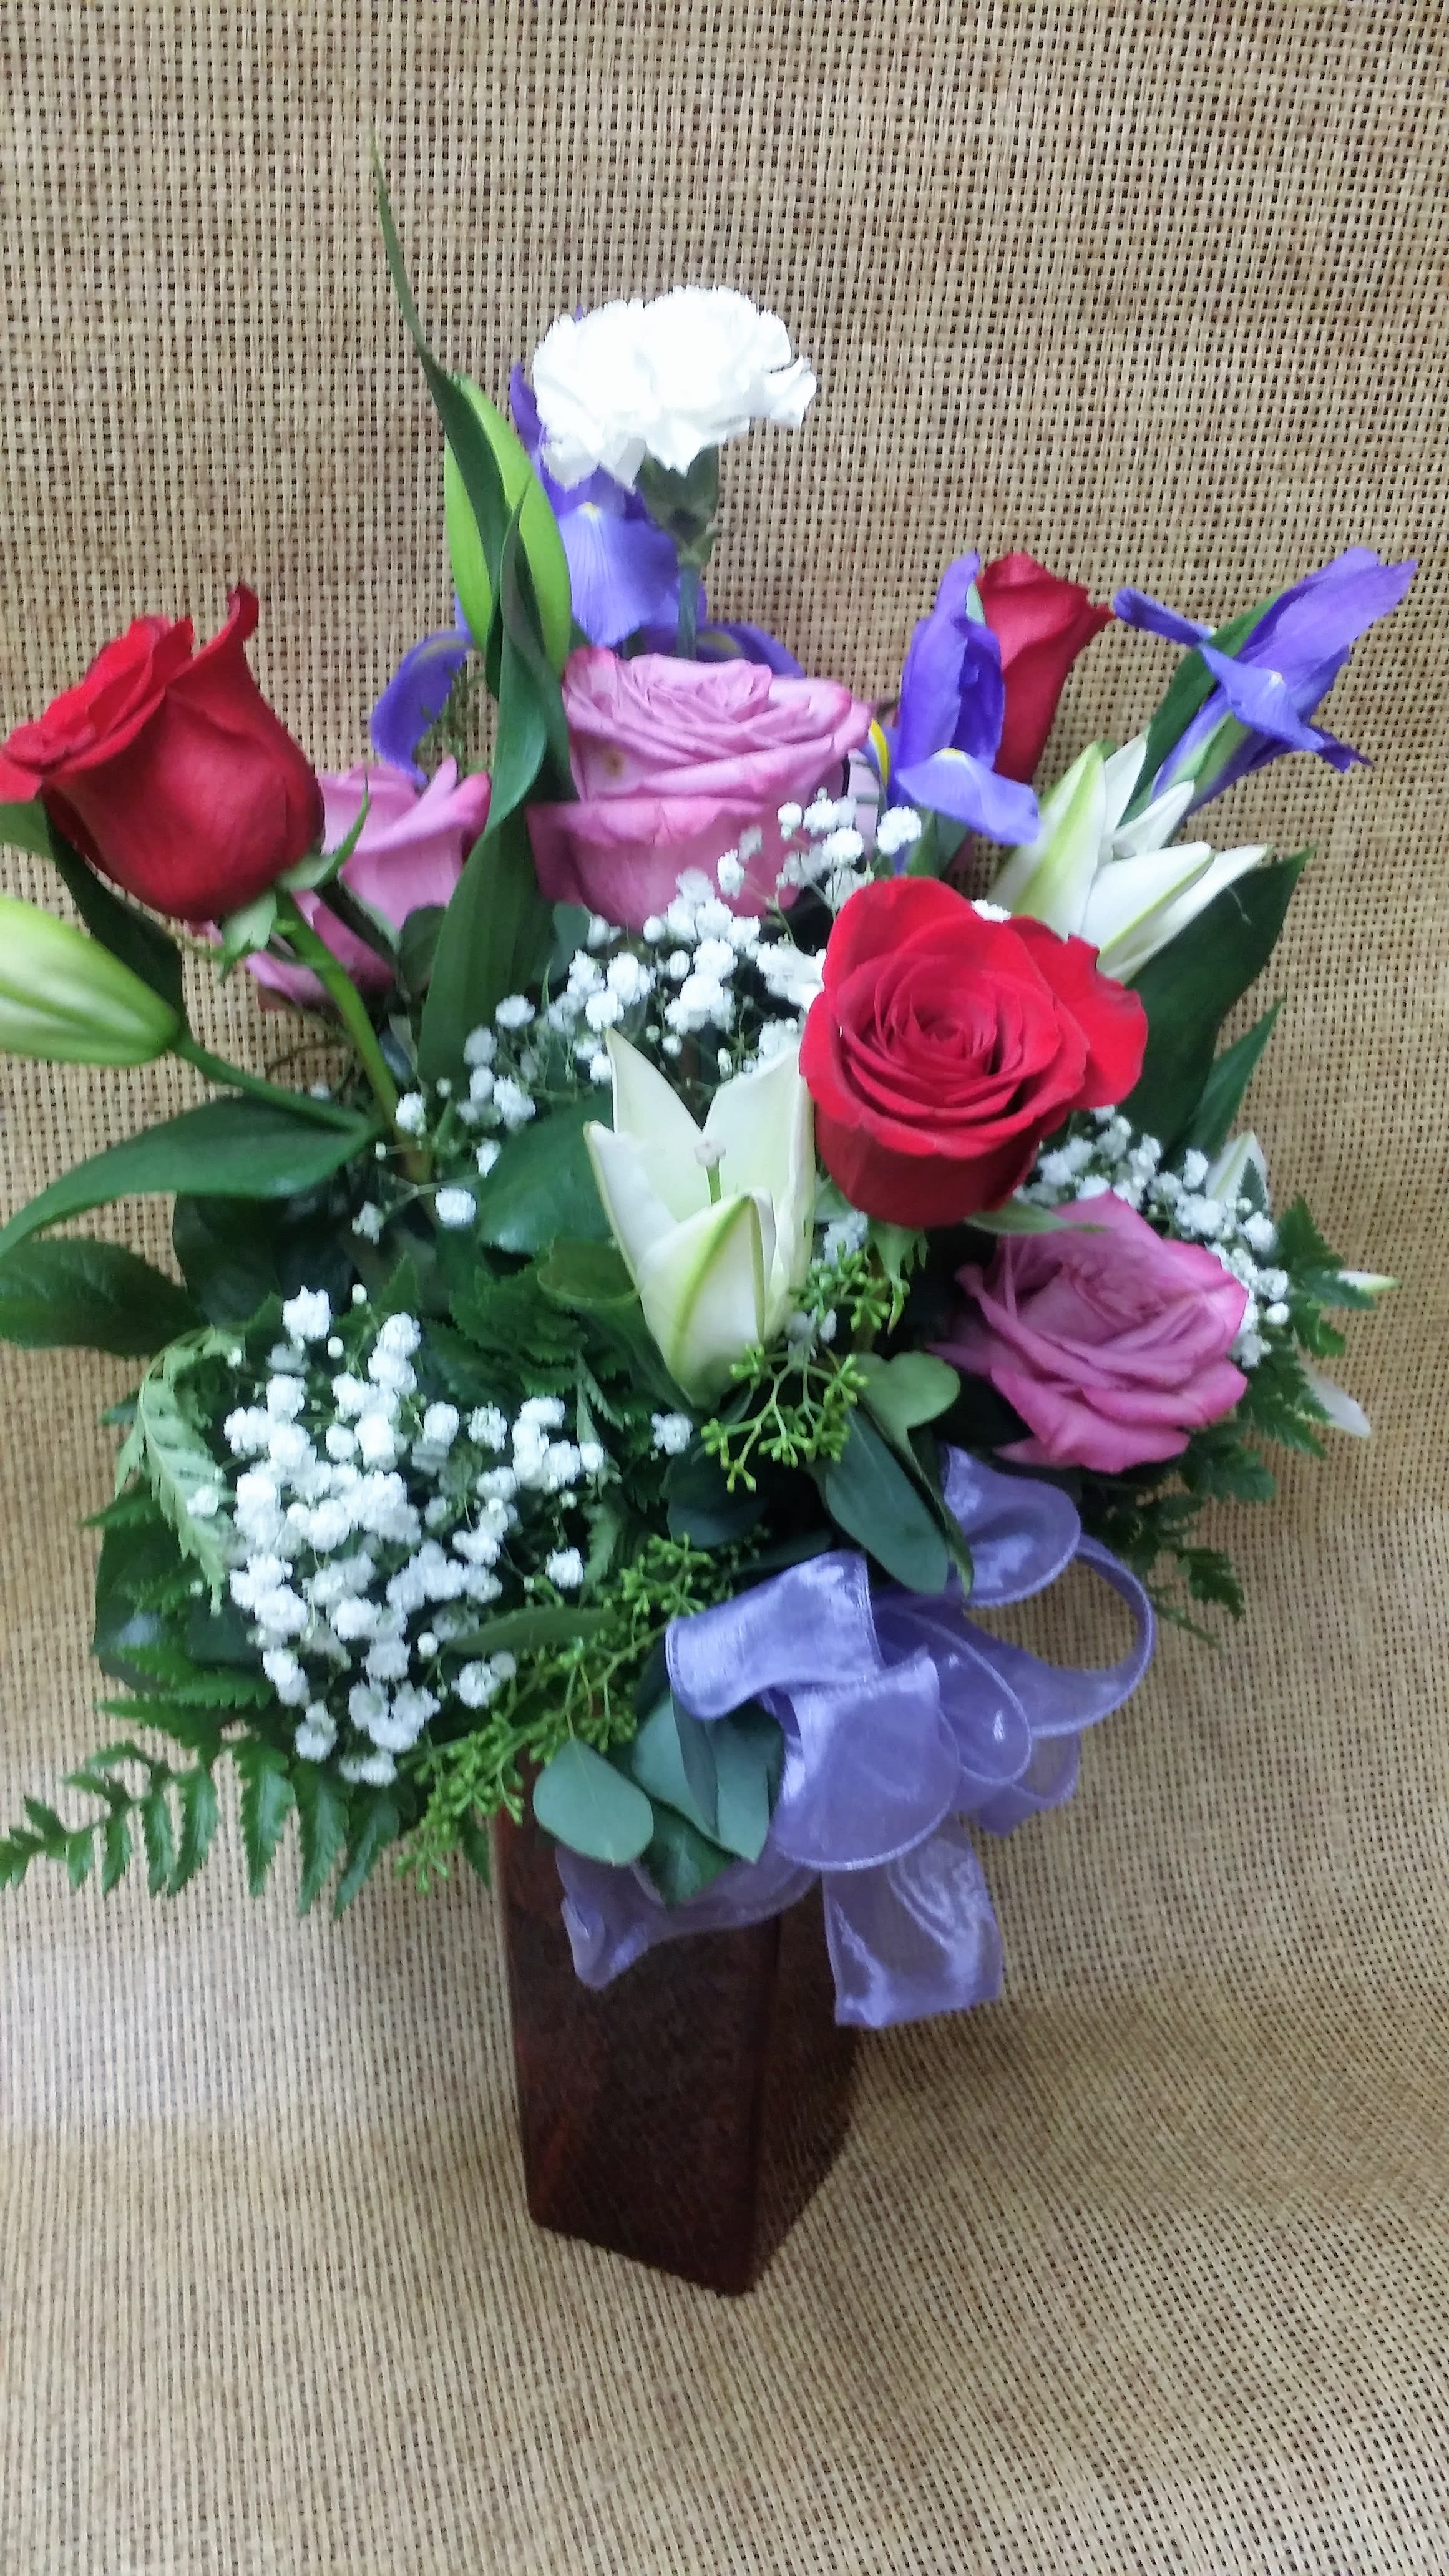 Spring Palette - Mixed roses, blue Asian iris and white lilies, accented by sprigs of baby's breath and seeded eucalyptus, make for a lovely spring bouquet. Comes in a red square vase.